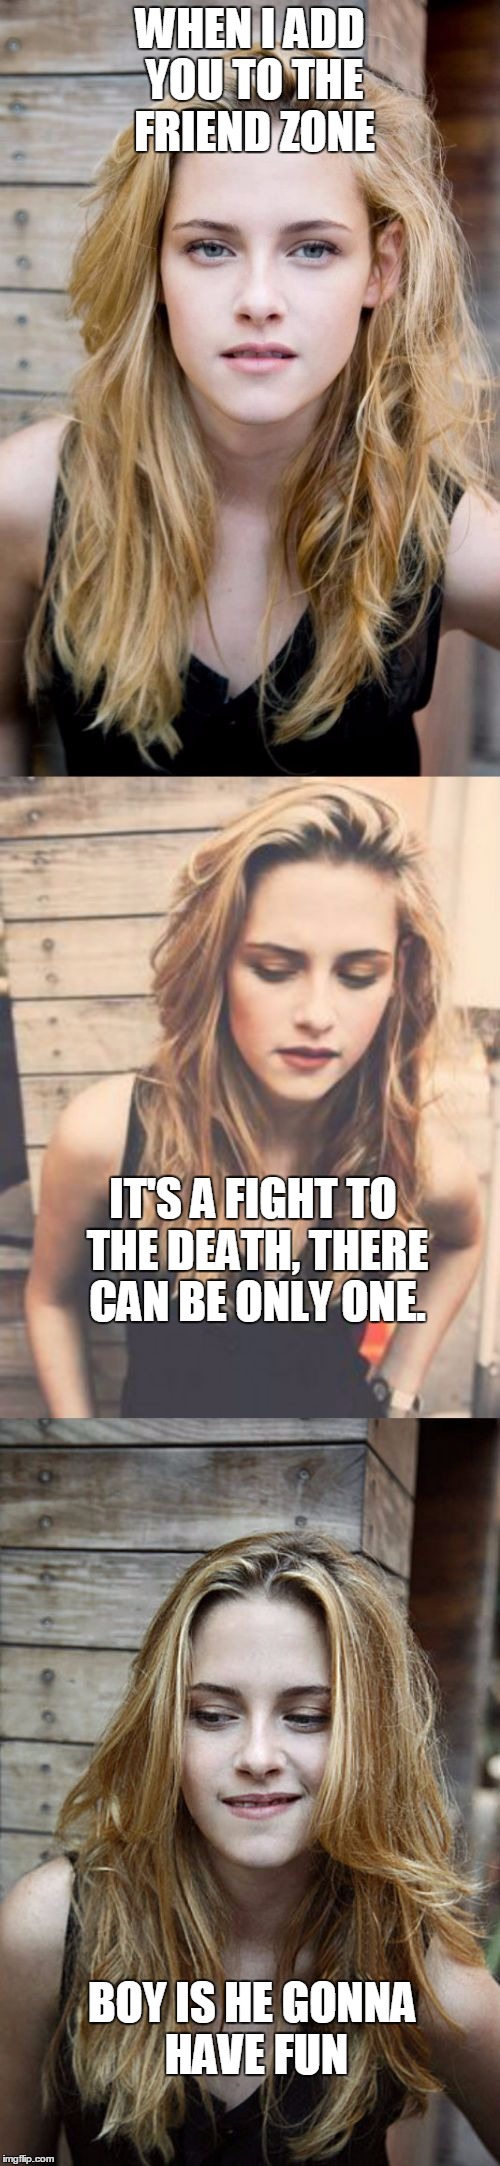 Bad Pun Kristen Stewart 2 | WHEN I ADD YOU TO THE FRIEND ZONE; IT'S A FIGHT TO THE DEATH, THERE CAN BE ONLY ONE. BOY IS HE GONNA HAVE FUN | image tagged in bad pun kristen stewart 2 | made w/ Imgflip meme maker